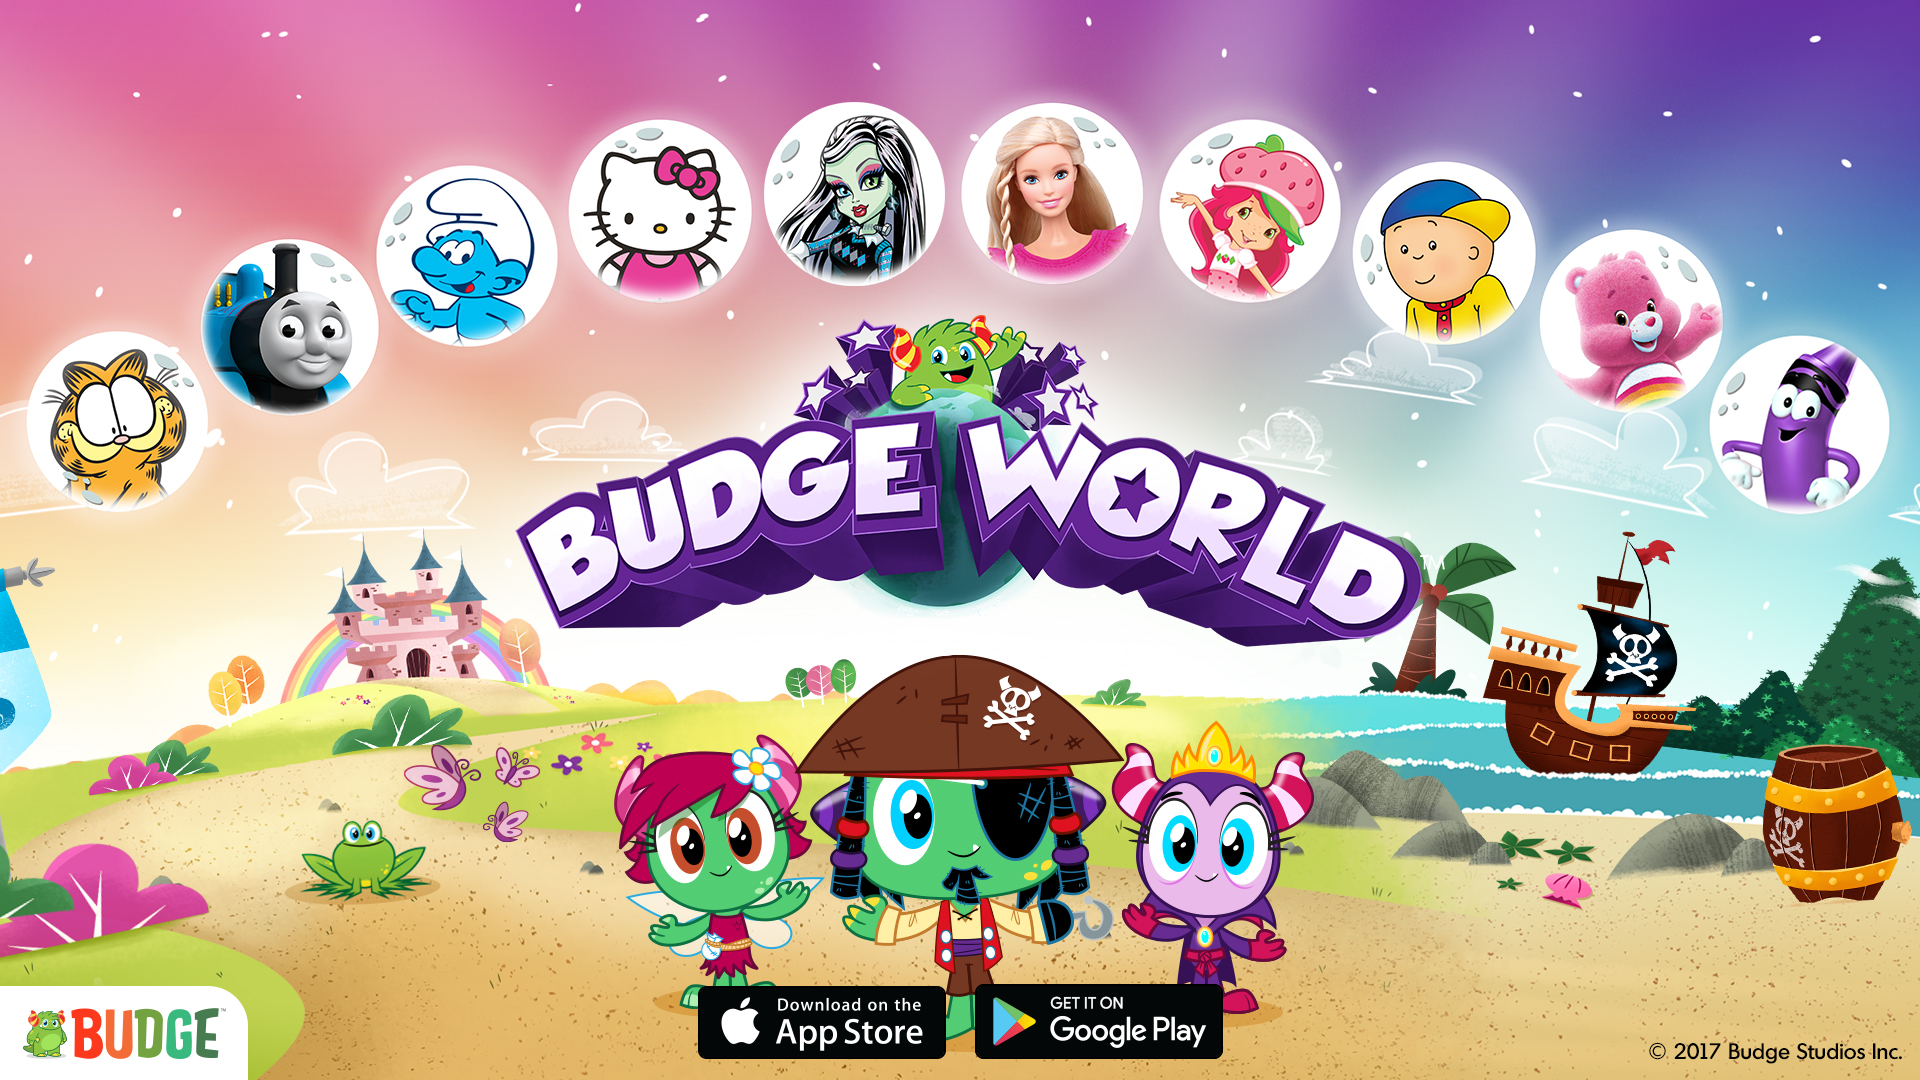 Budge World, the Ultimate App for Preschoolers! - Budge 